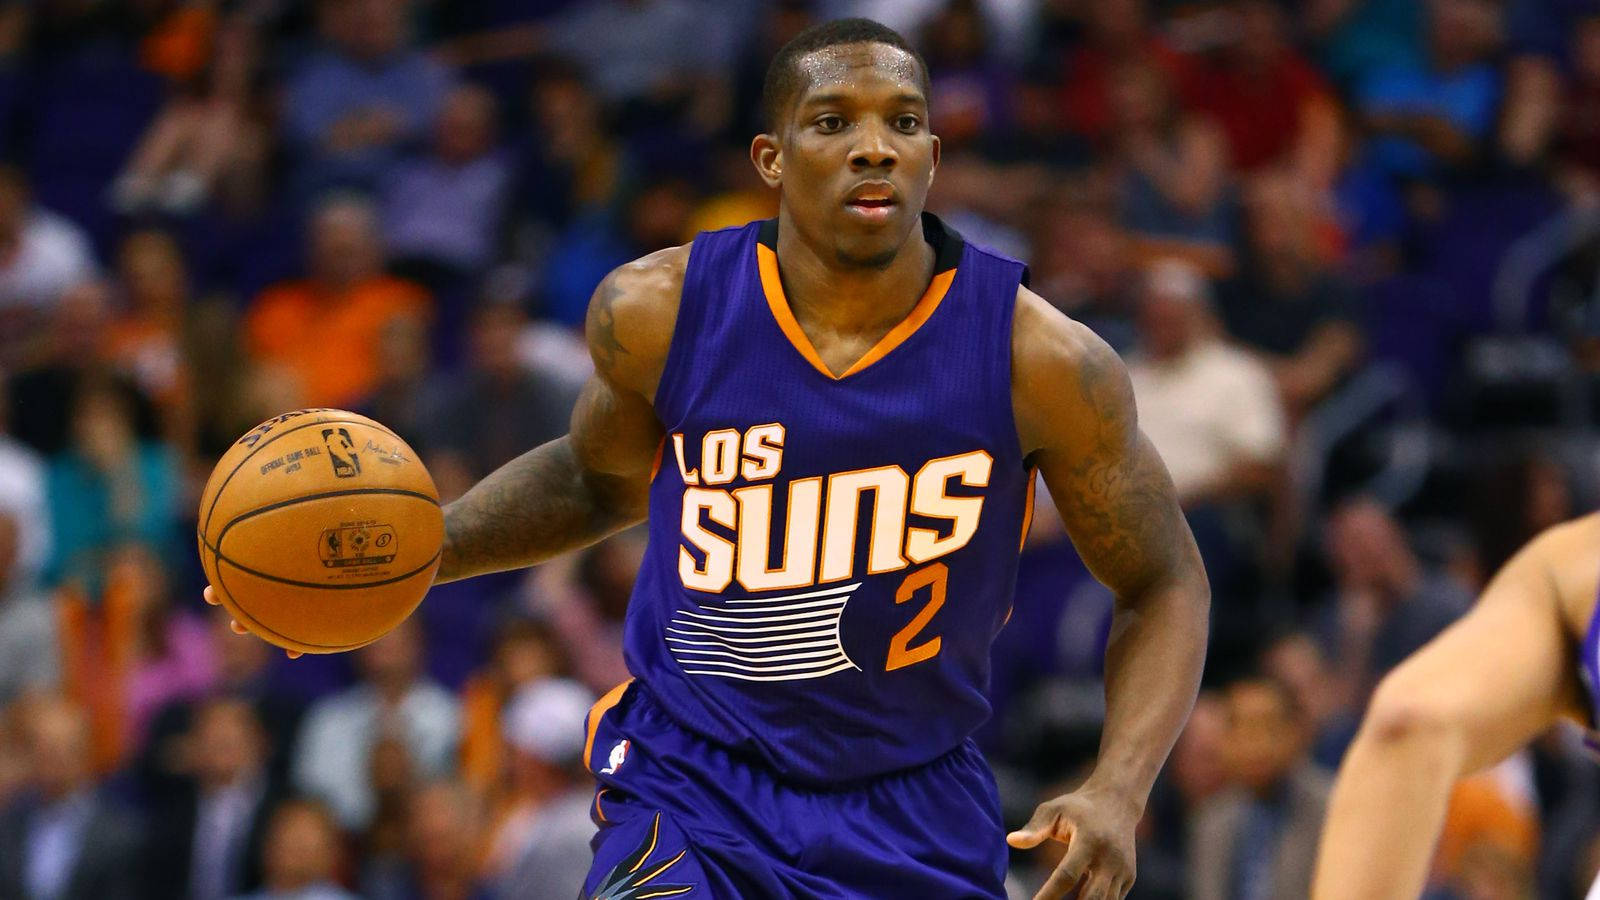 Professional NBA player Eric Bledsoe planning a strategy during a game. Wallpaper